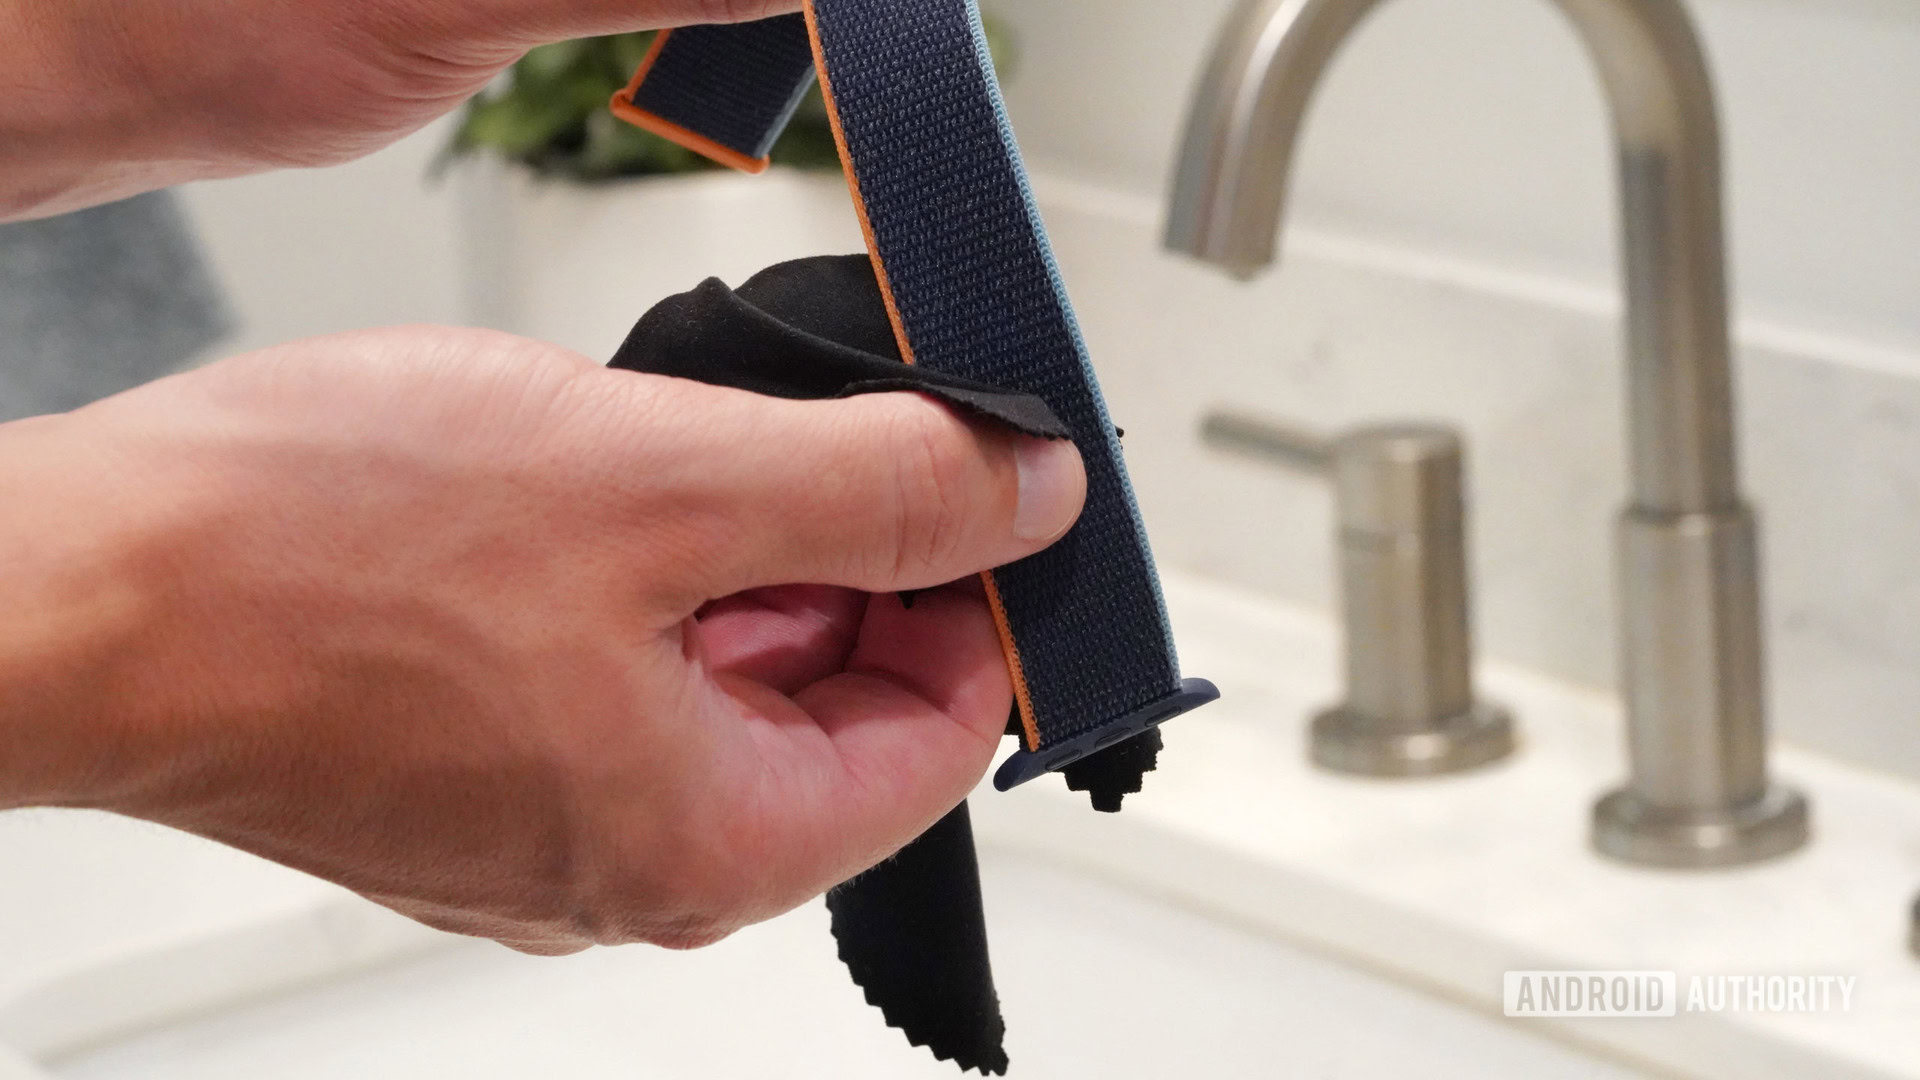 Men's hands clean the nylon Apple Watch band with a non-abrasive, lint-free cloth.